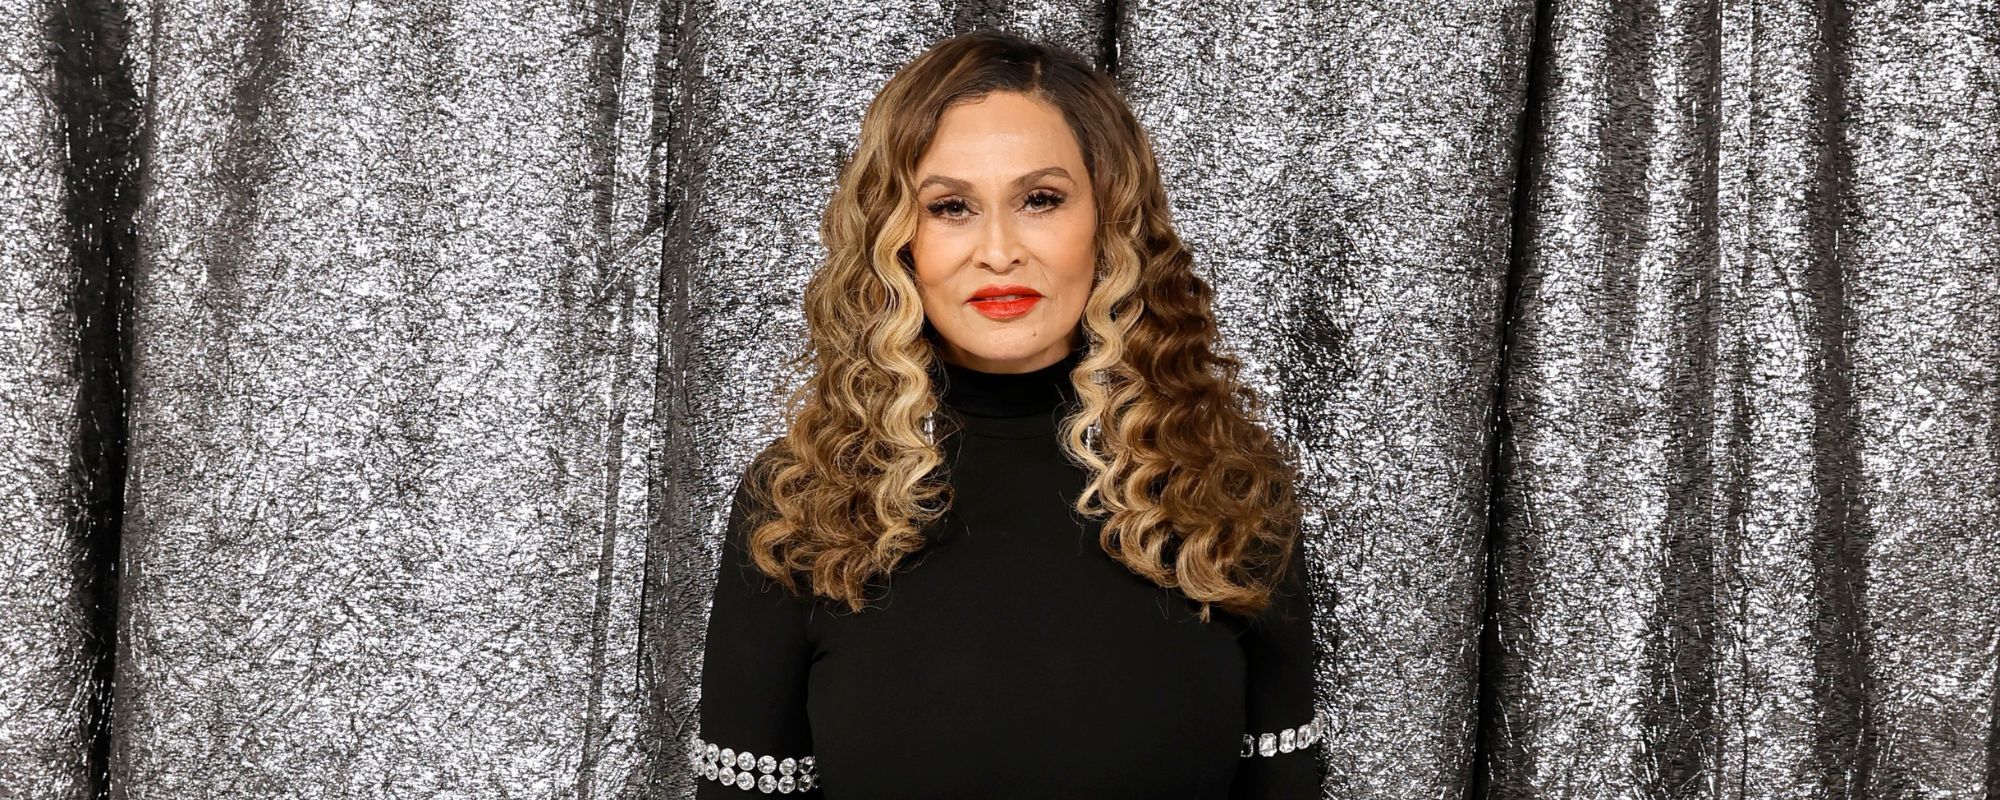 Beyoncé’s Mom Claps Back At Critics: Cowboys Do Not “Belong to White Culture Only”